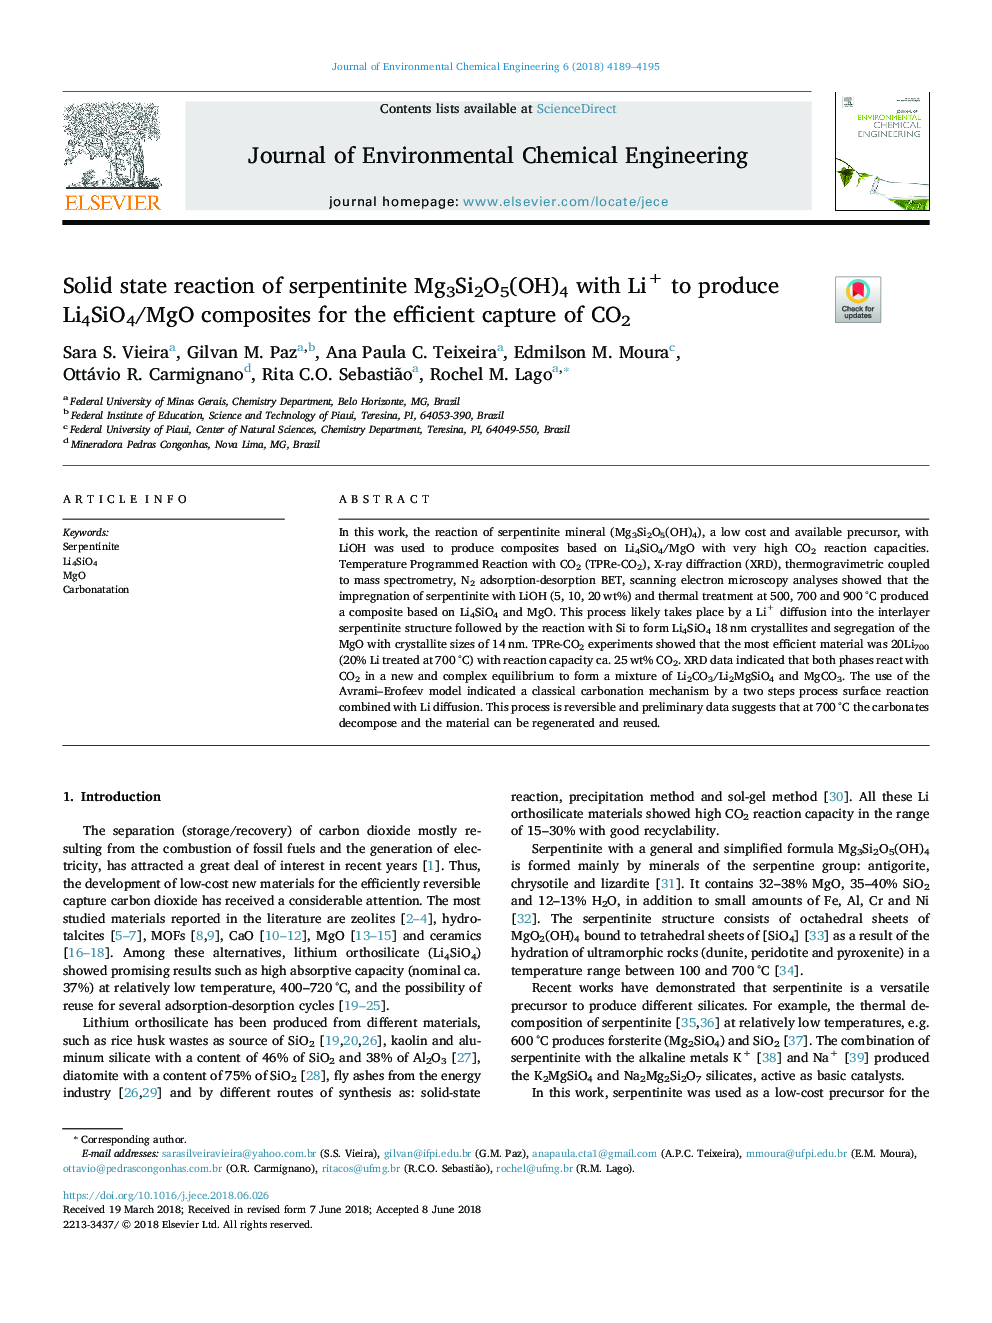 Solid state reaction of serpentinite Mg3Si2O5(OH)4 with Li+ to produce Li4SiO4/MgO composites for the efficient capture of CO2